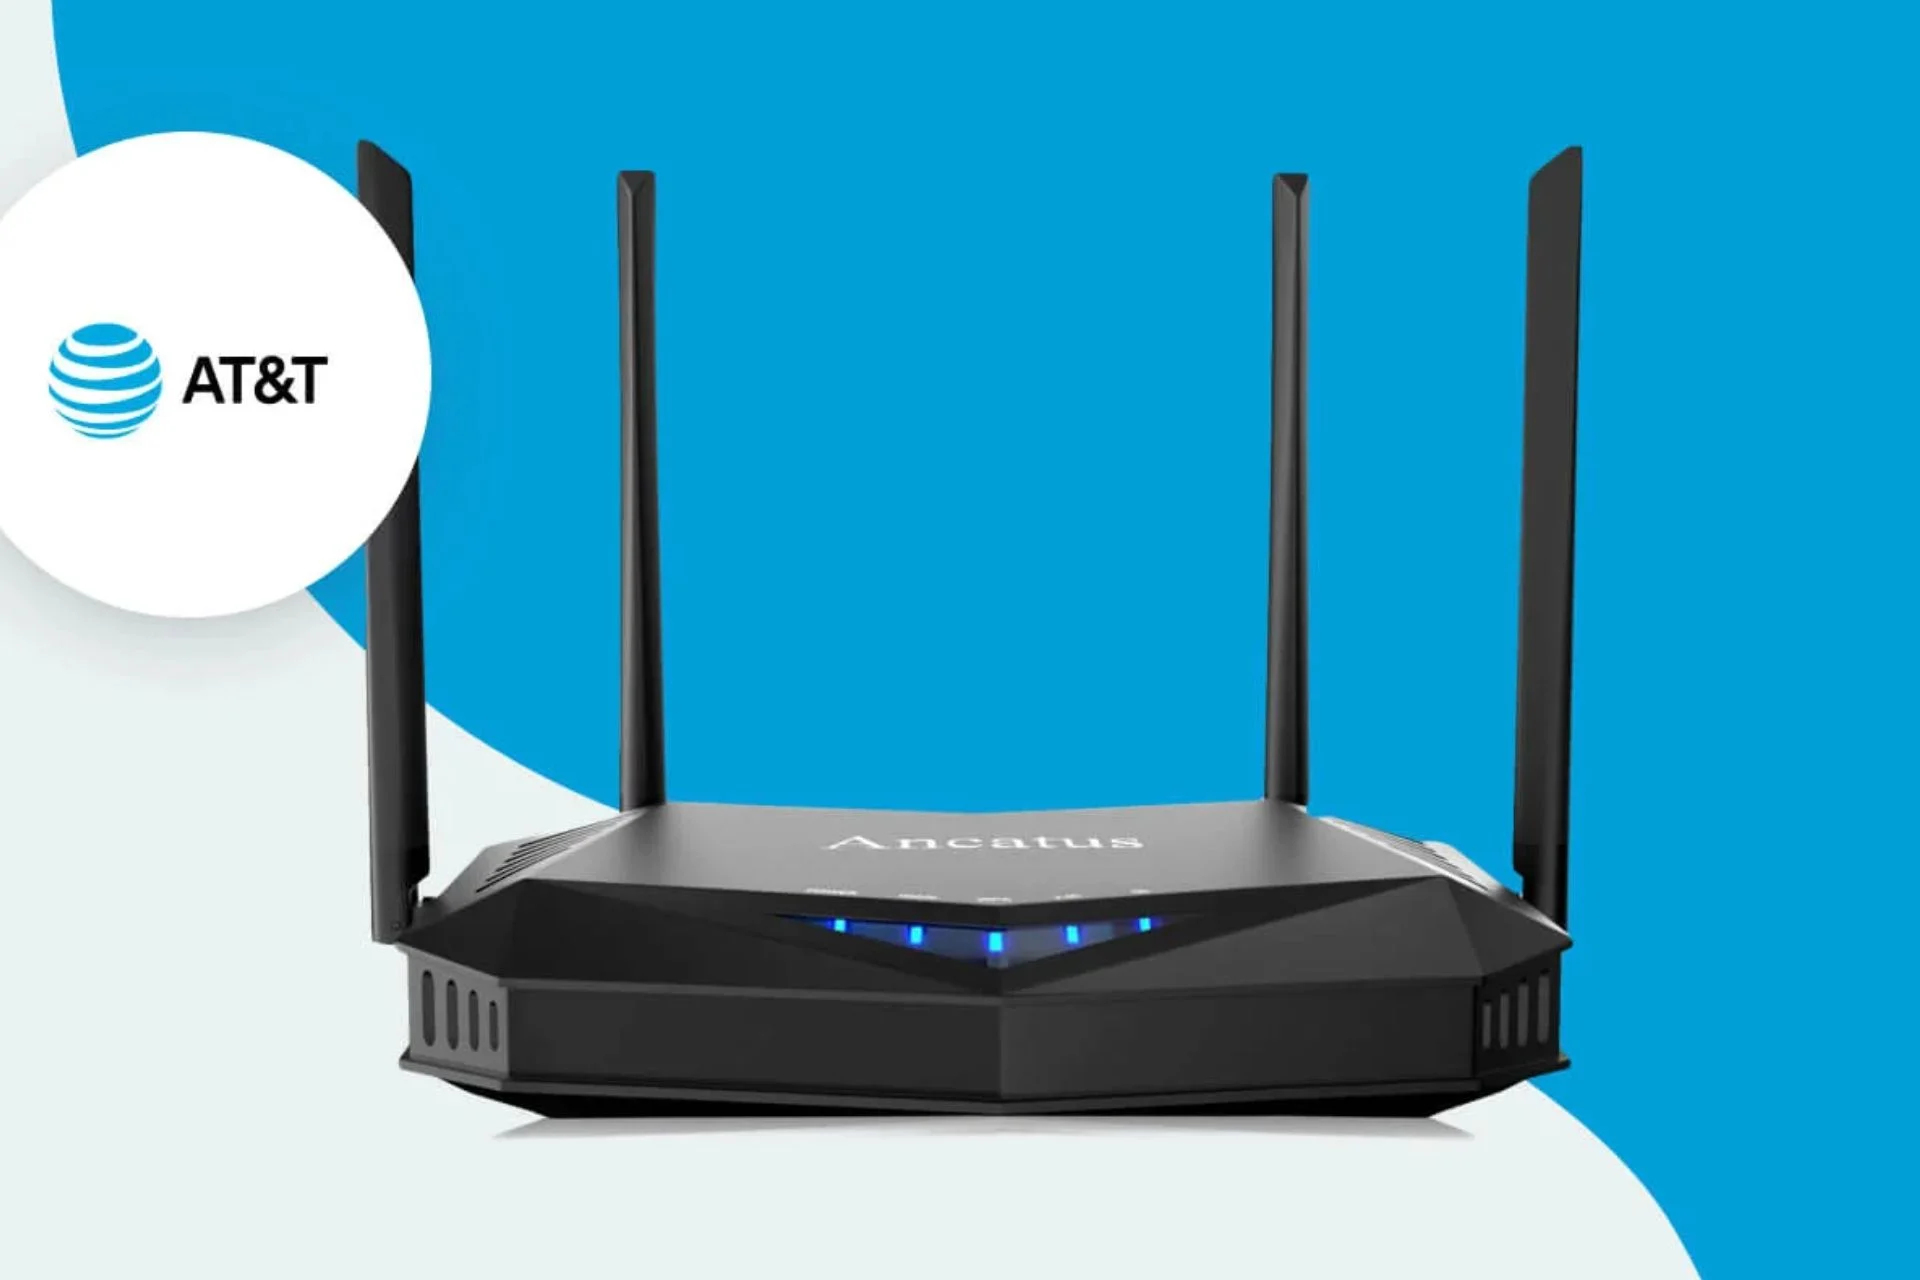 How To Change Password On AT&T Wireless Router